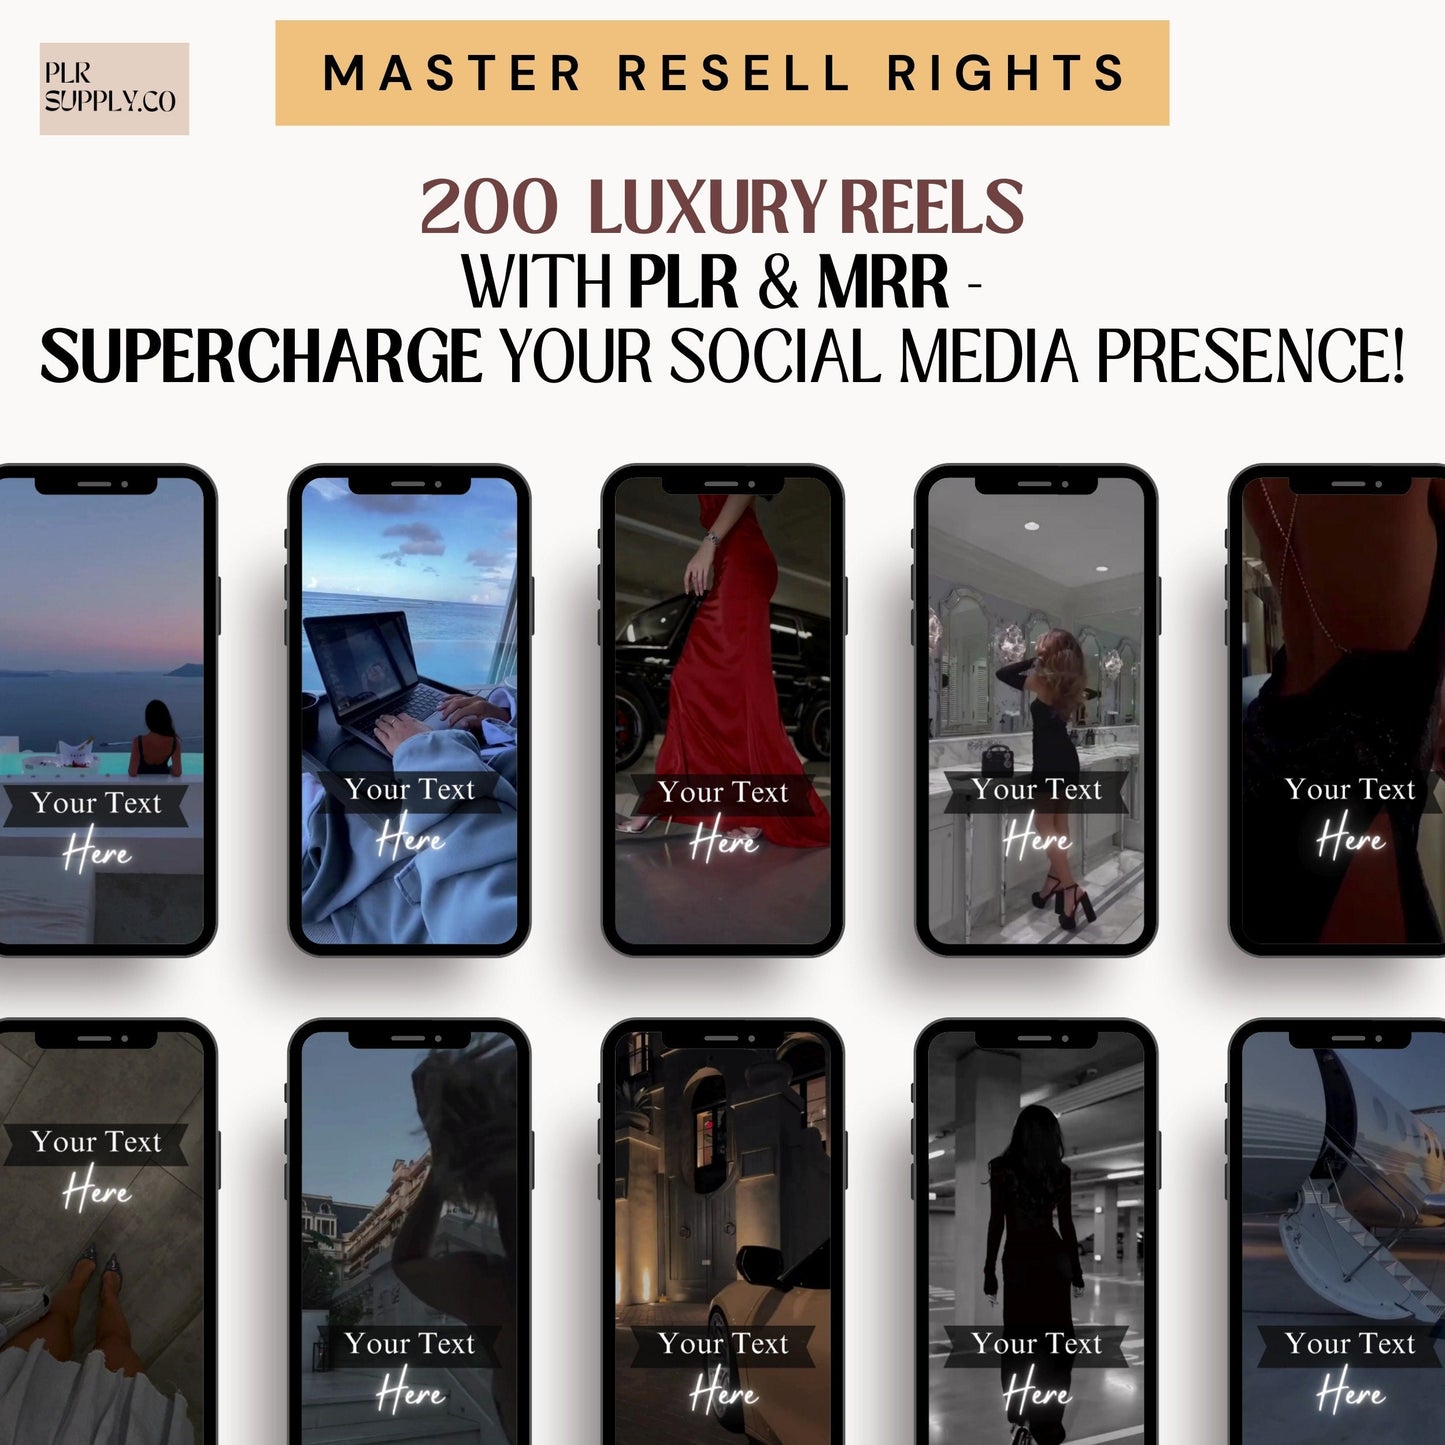 Faceless Luxury Instagram Reels PLR Templates with Resell Rights- DFY Digital Product